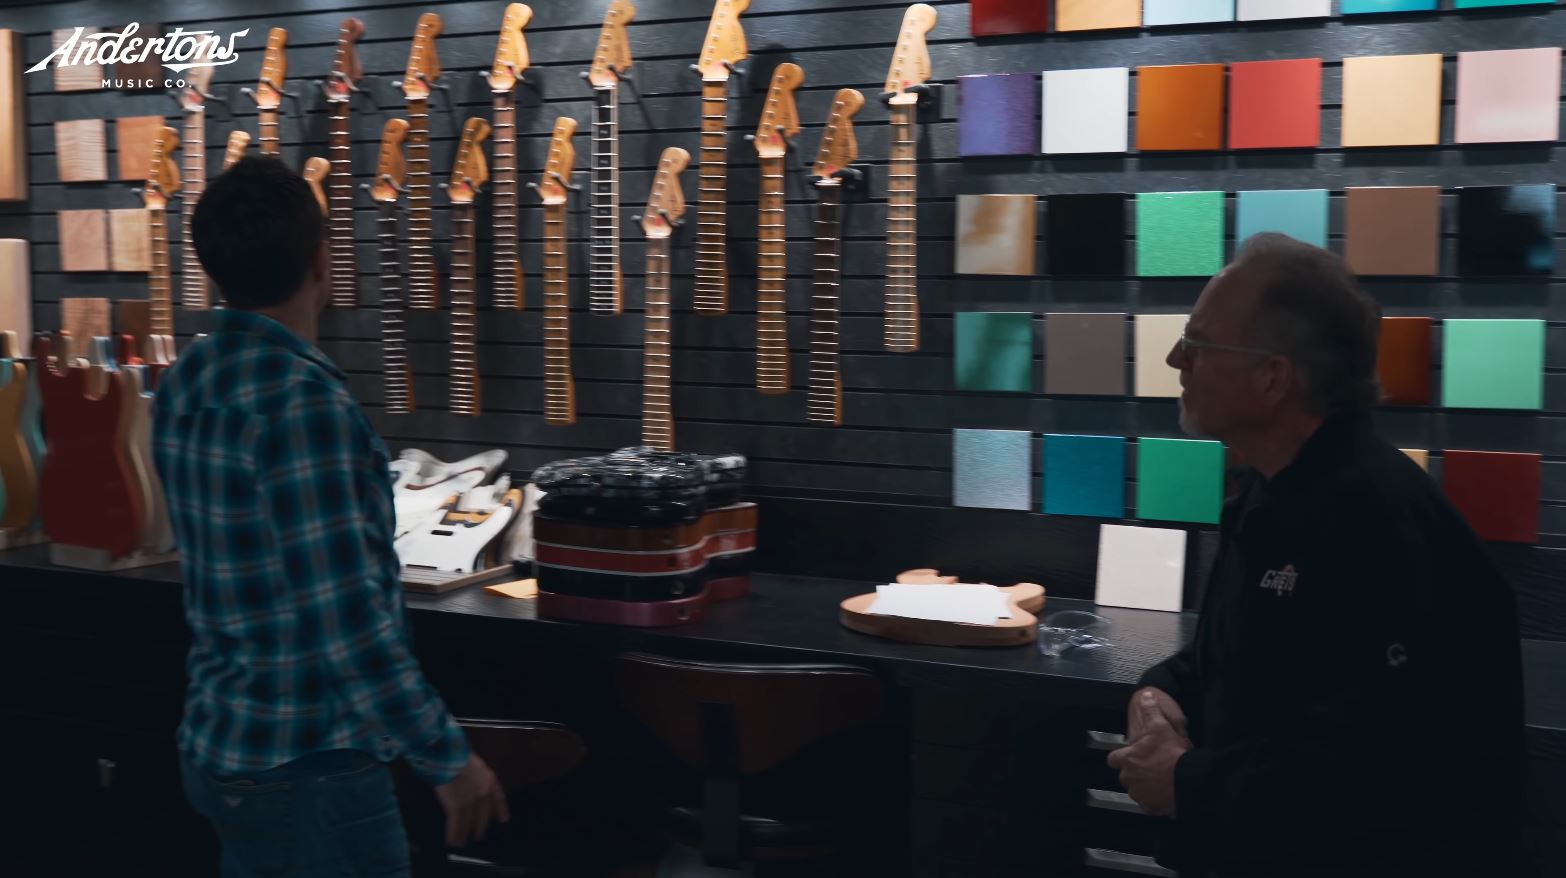 Behind The Scenes At The Fender USA Guitar Factory